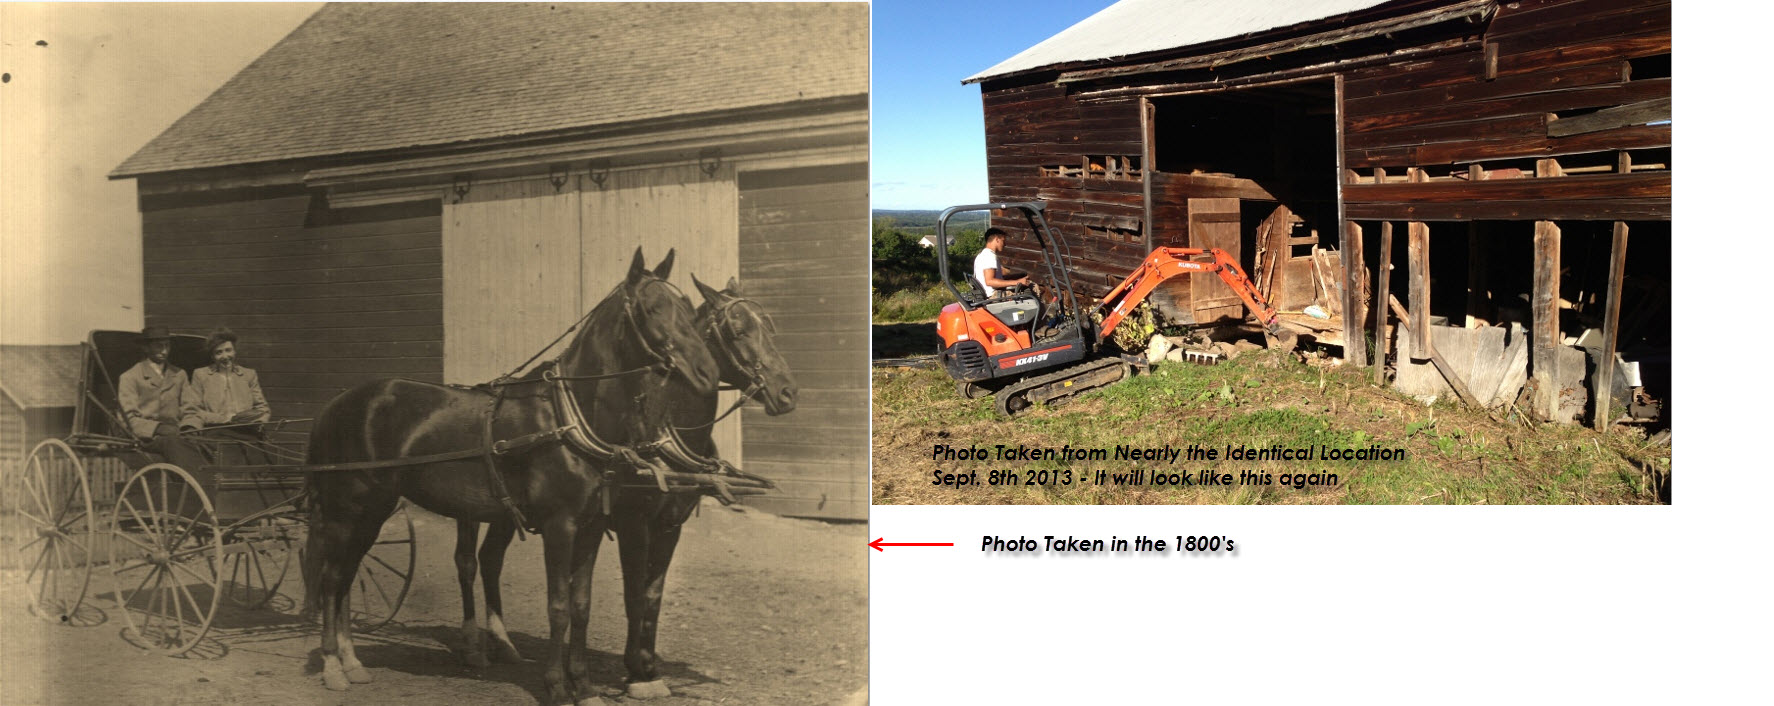 Barn - Then and Now.jpg